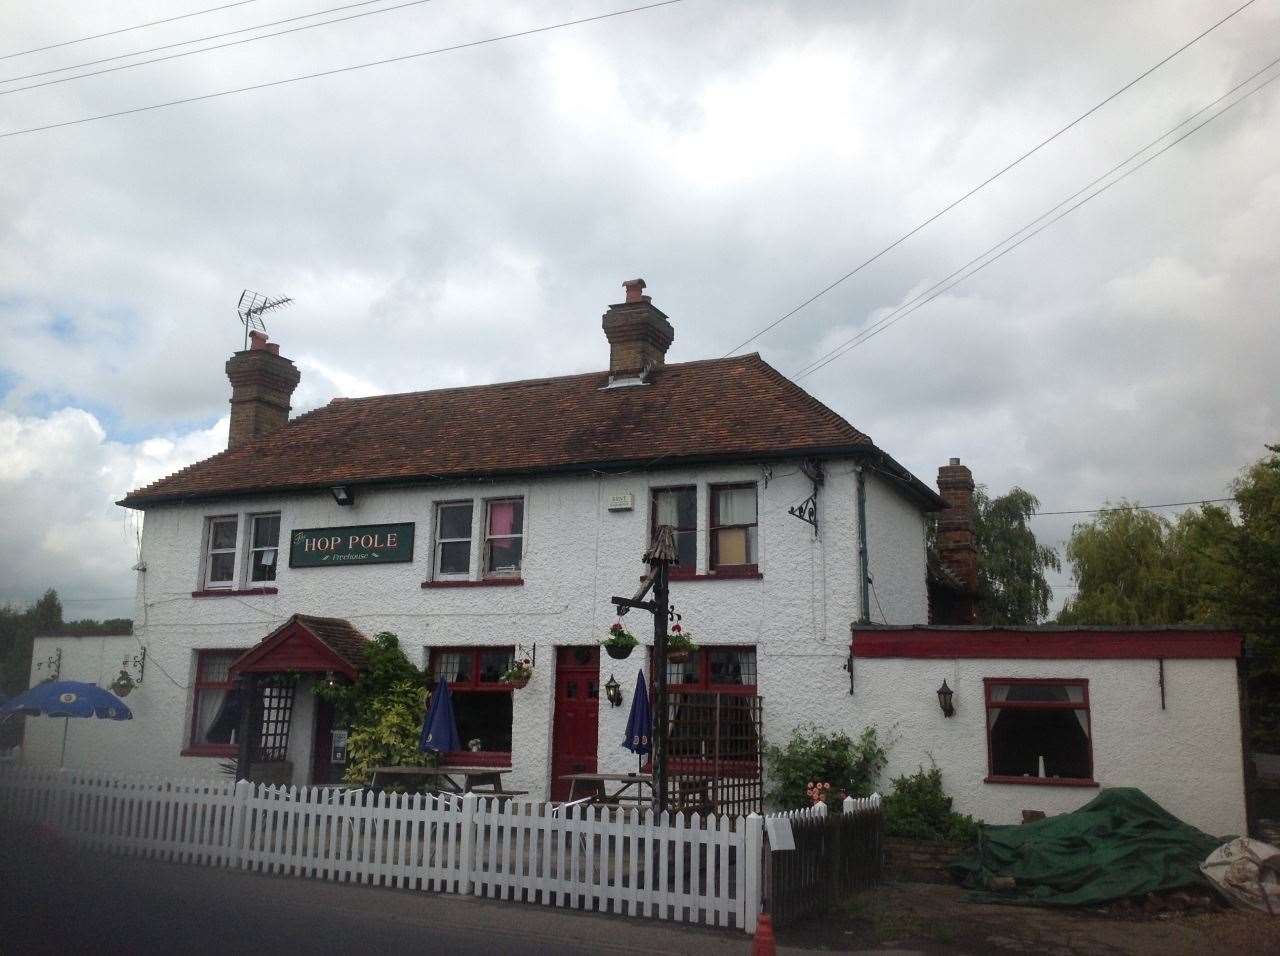 The Hop Pole Inn, in Nettlestead, near Maidstone, is the third most viewed property in Kent on Zoopla